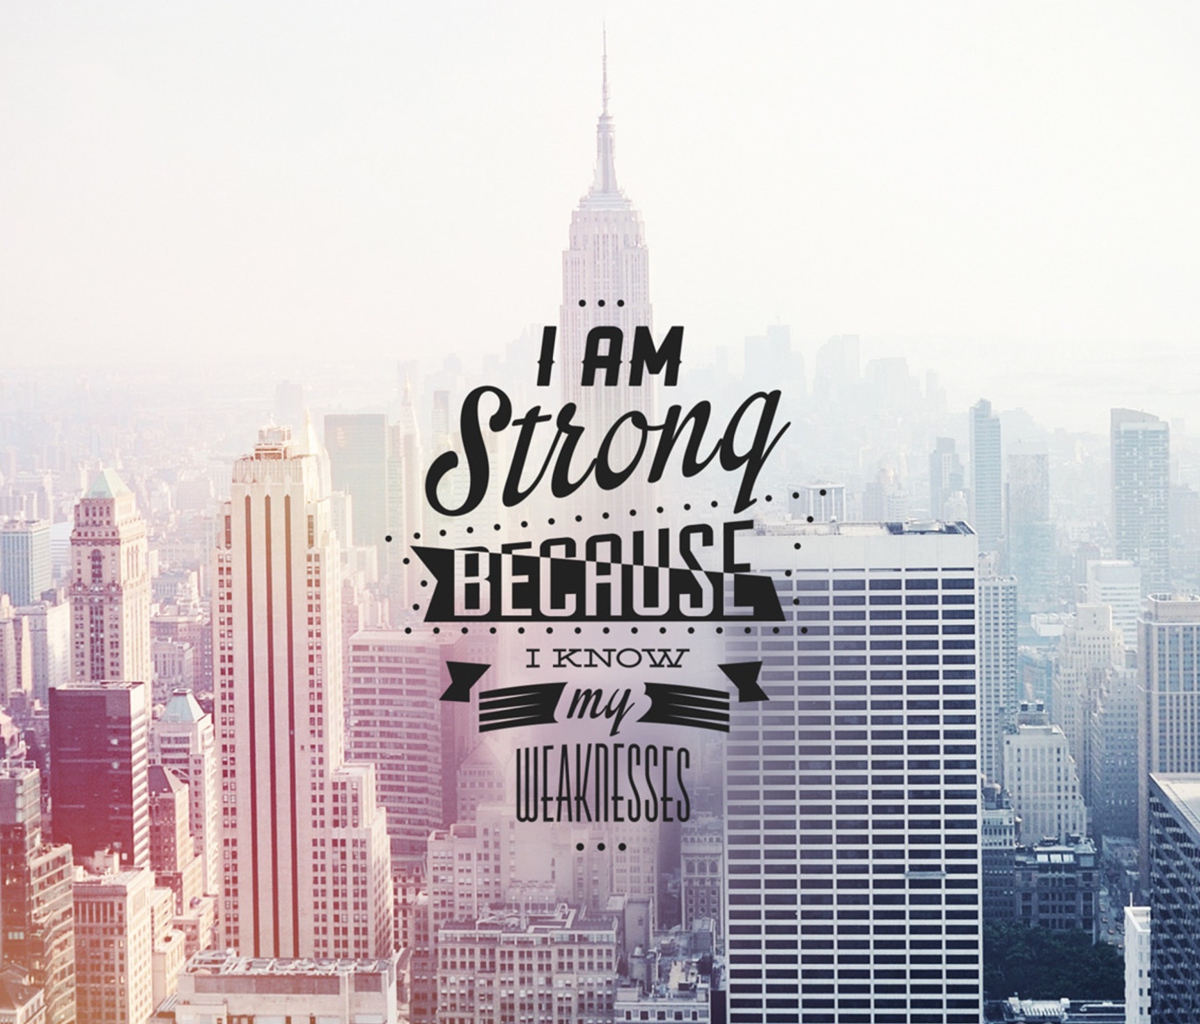 I am strong because i know my weakness screenshot #1 1200x1024